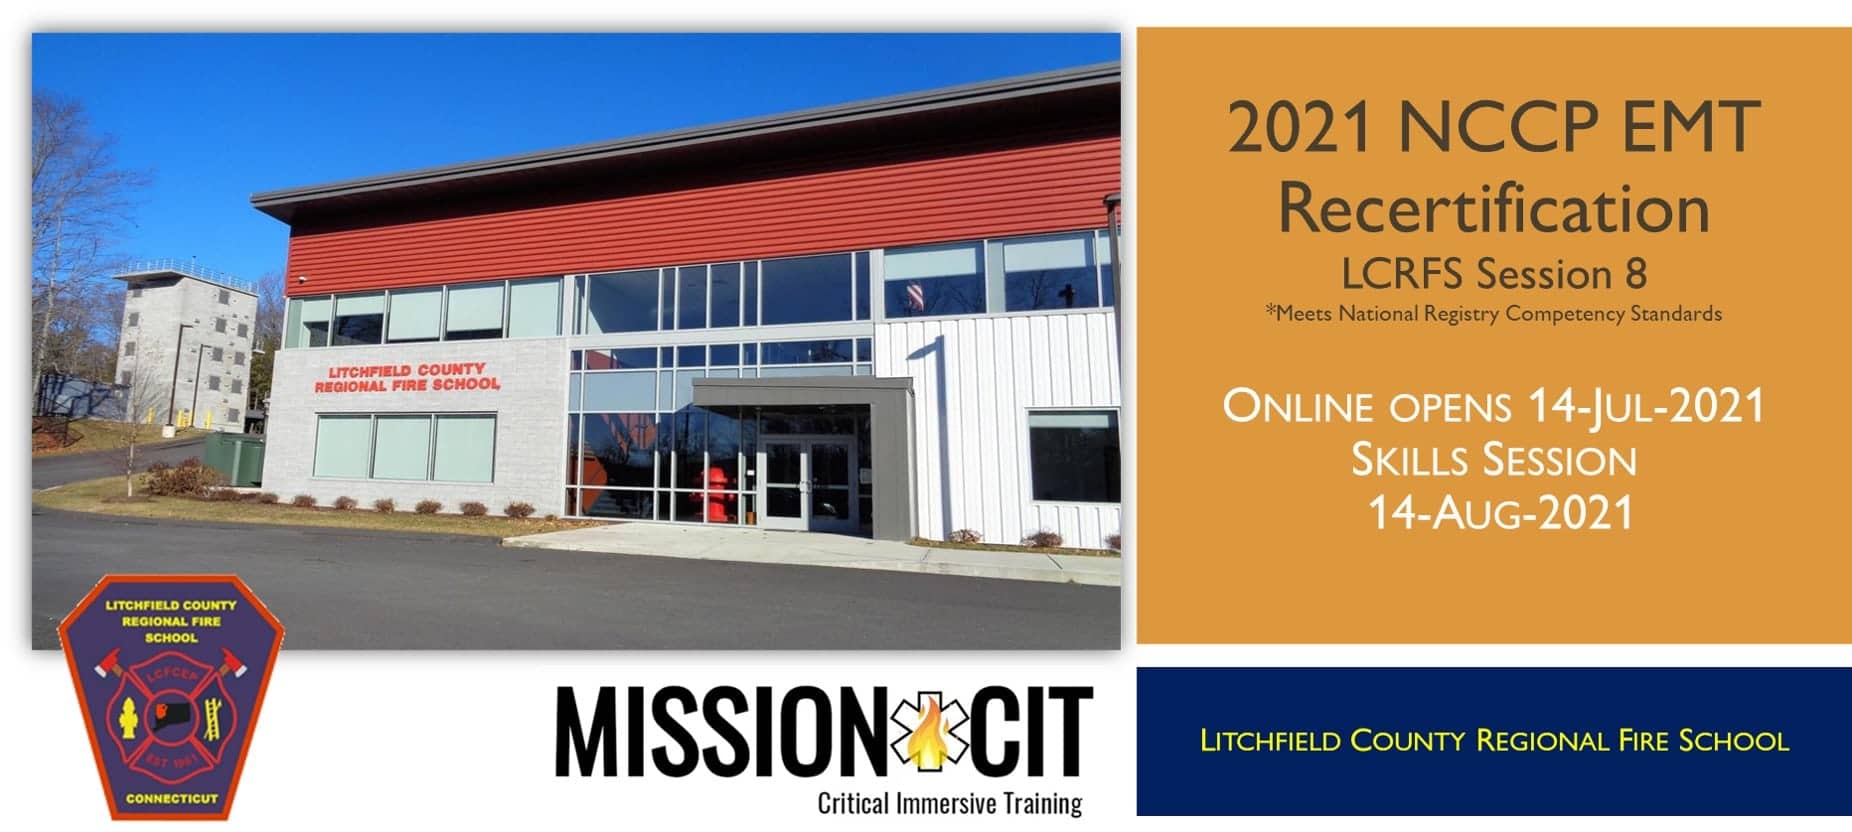 EMT NCCP 2021 Recertification Course | LCRFS Session 8 | Hybrid 5 Day Course | CT EMT classes | EMT Recertification CT | National Registry